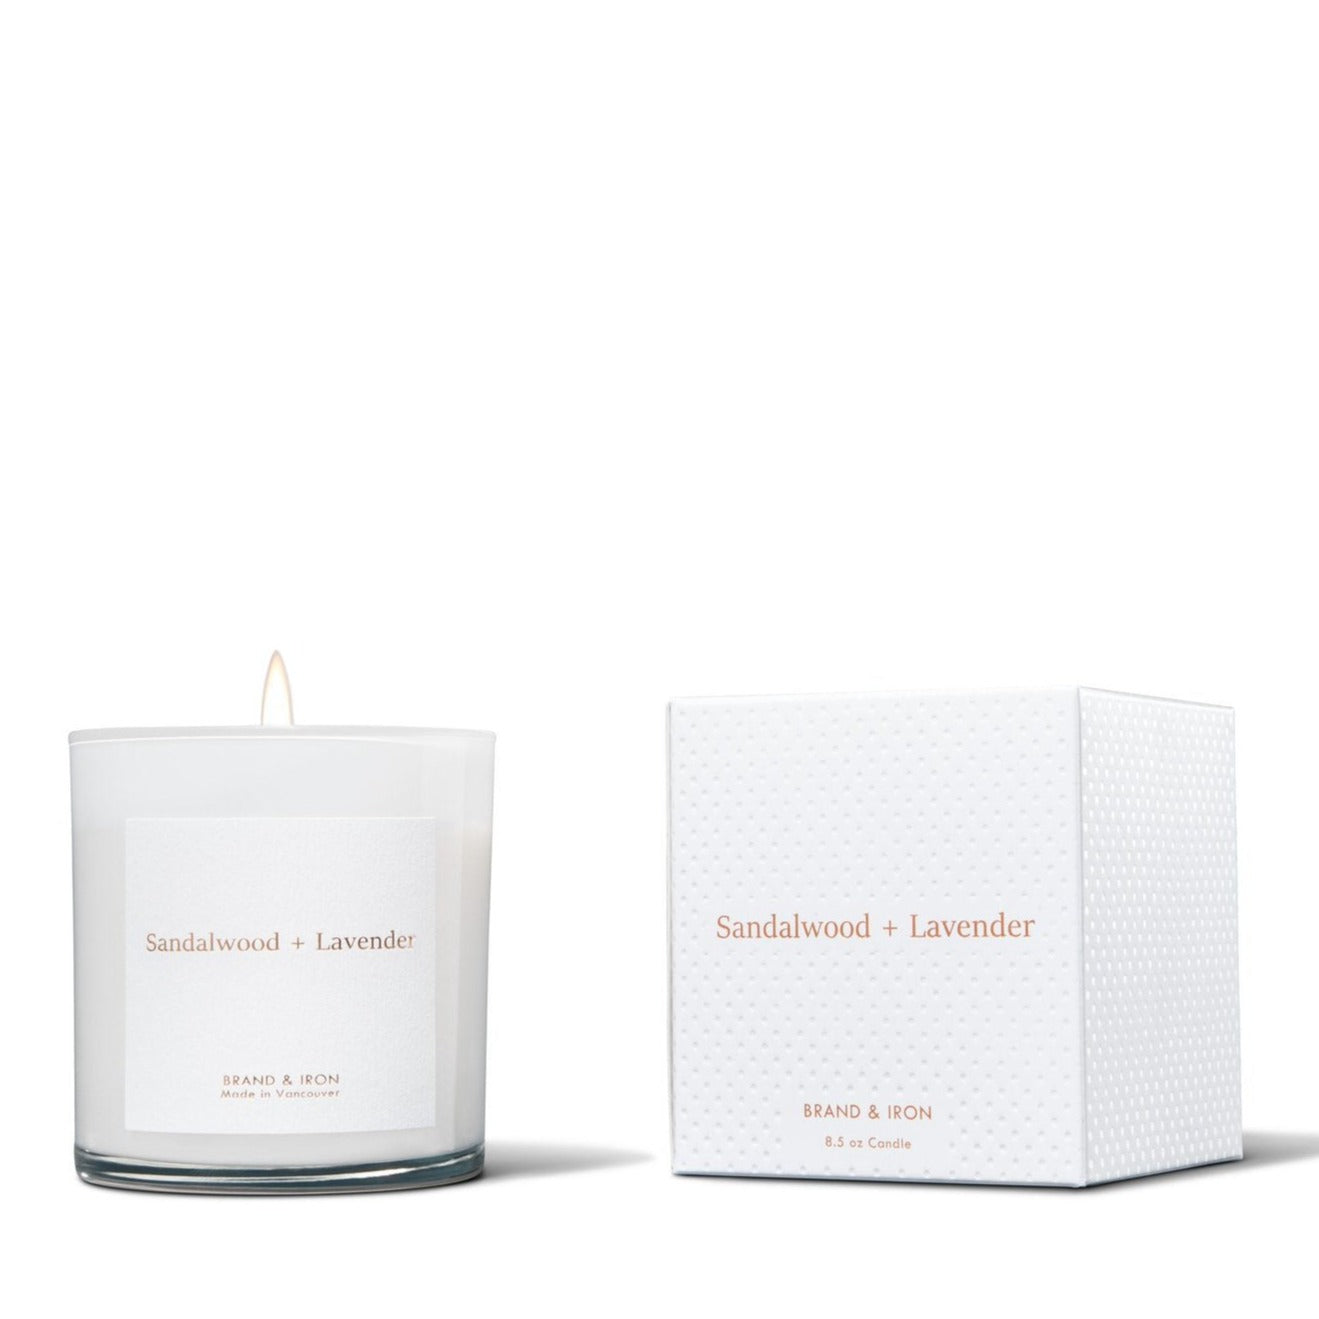 BRAND & IRON - HOME SERIES CANDLE IN SANDALWOOD & LAVENDER